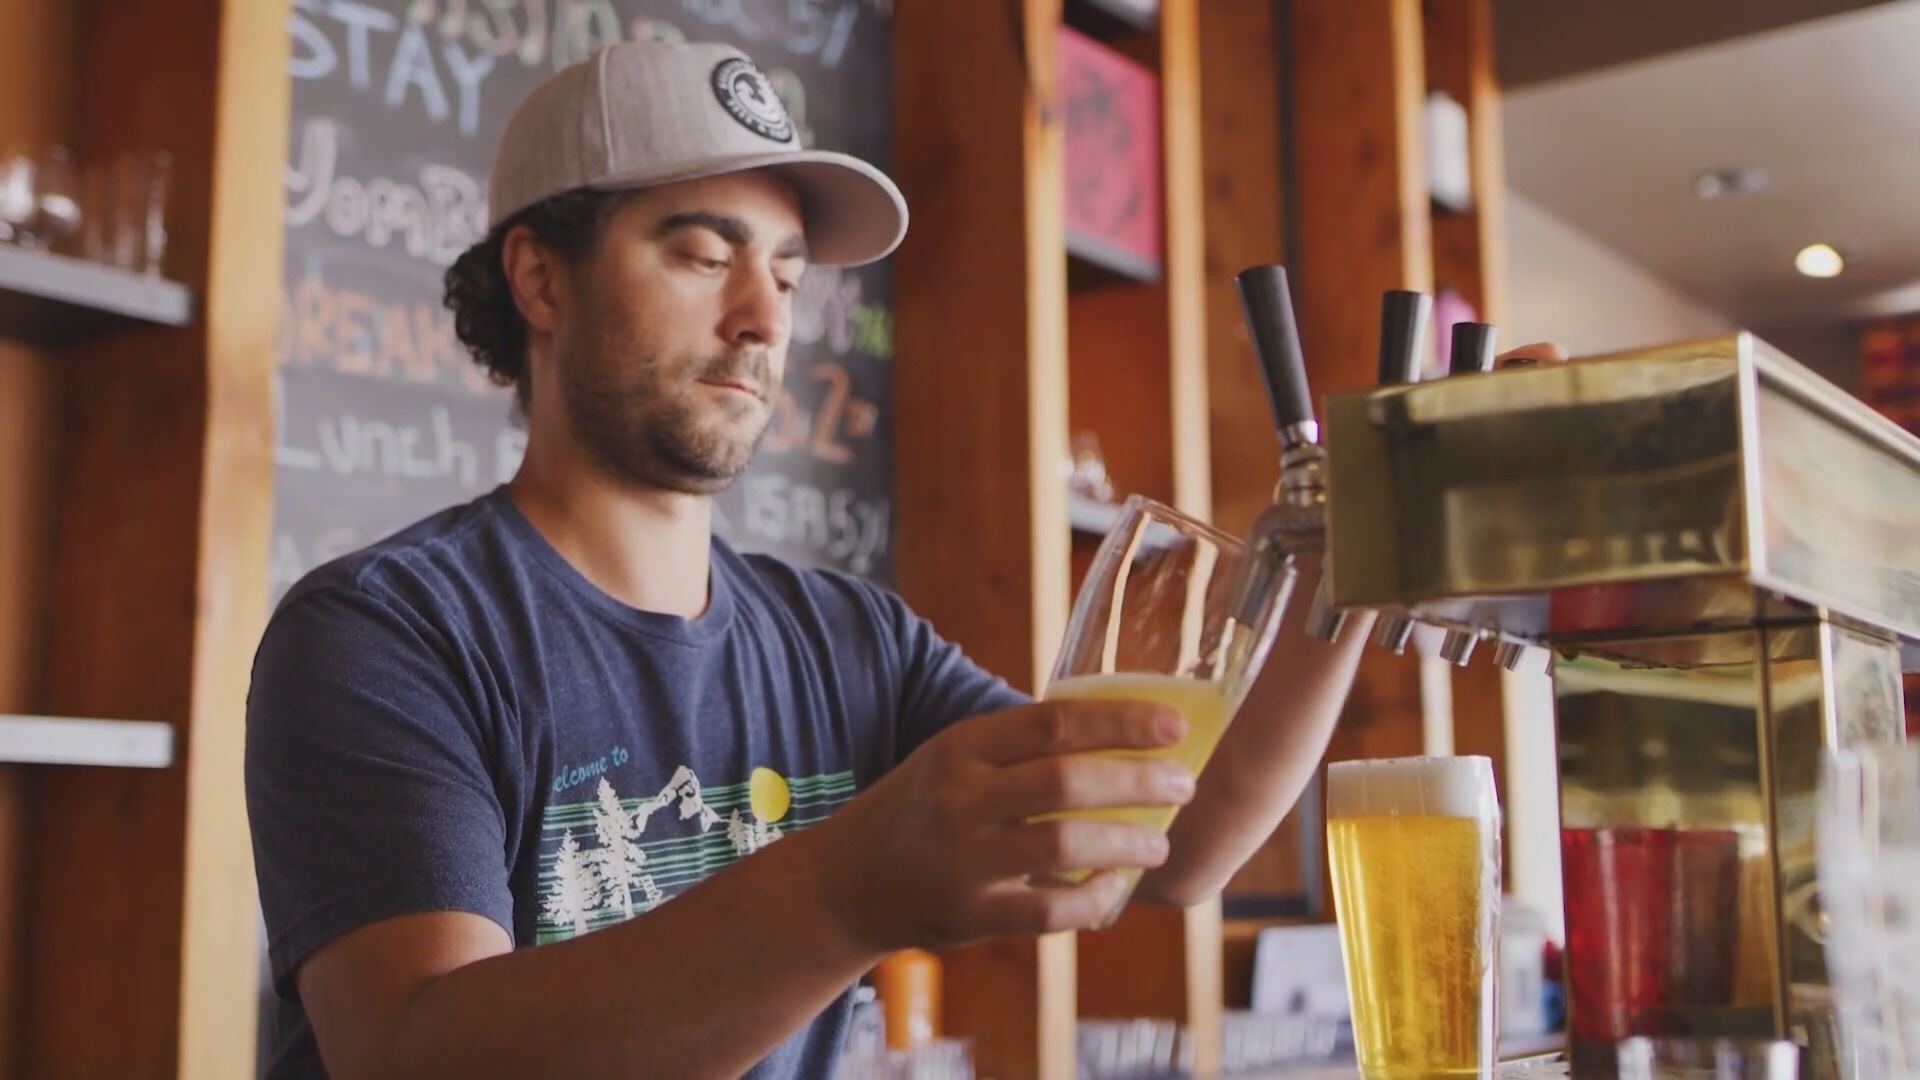 “Cheers to the Land” combines the efforts of more than a dozen breweries. They want to raise money and awareness to save farmland from development.